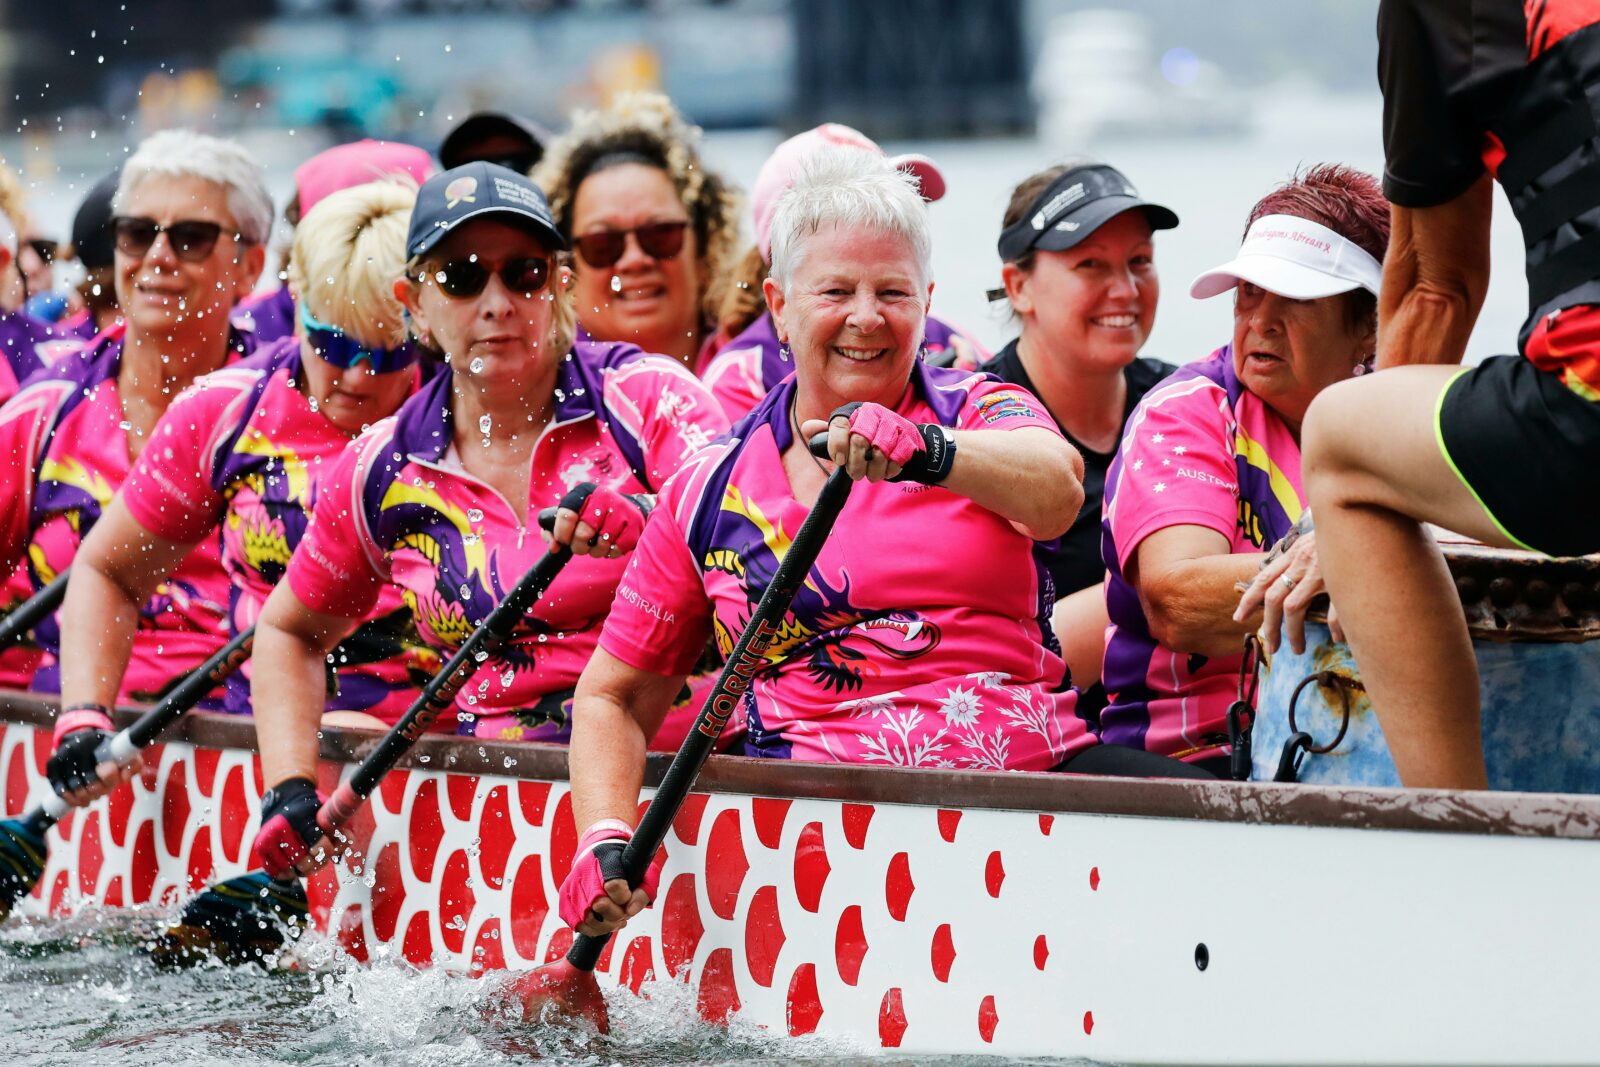 A photo of women Dragon Boating